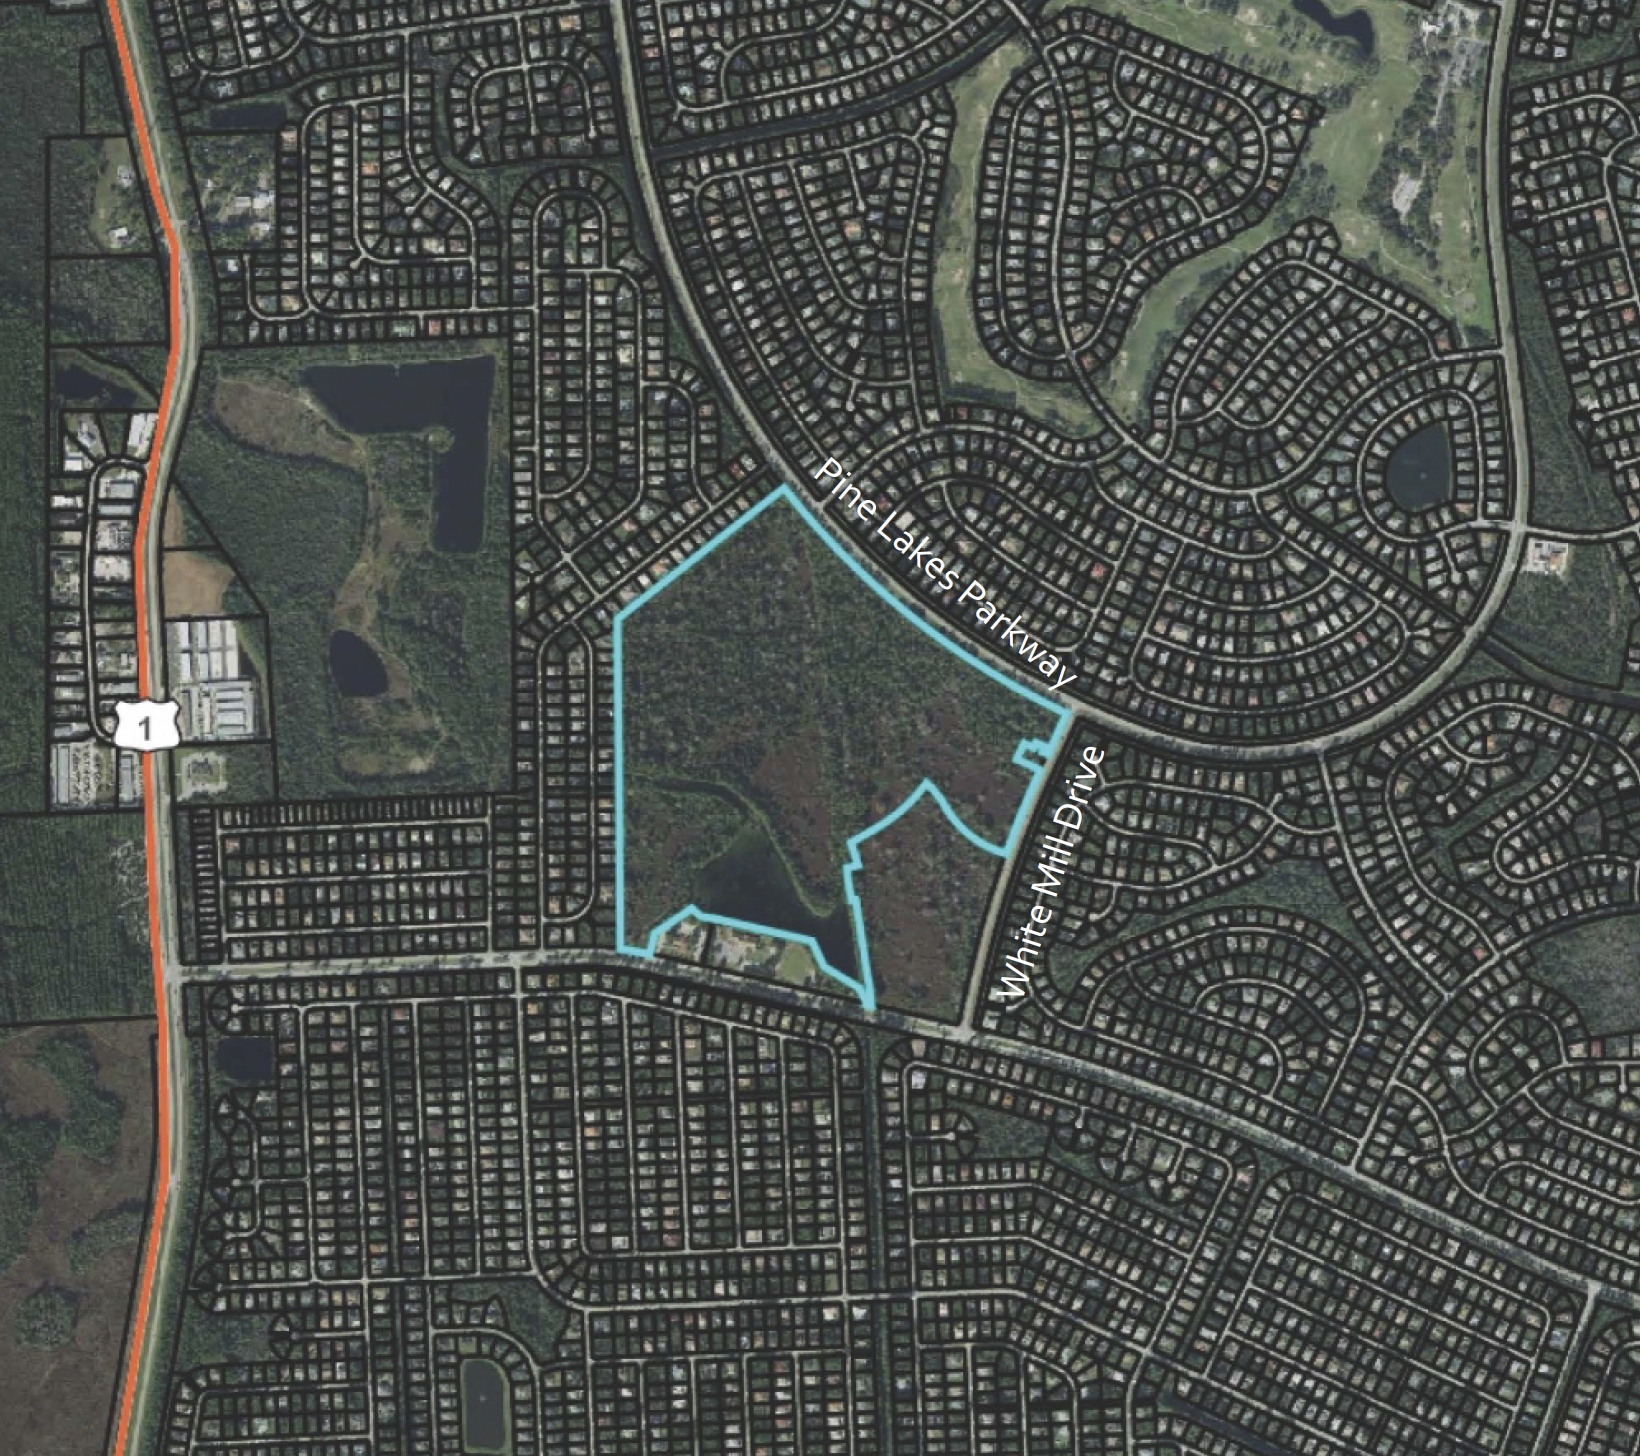 The proposed site of the Whiteview Village single-family home development, as shown in City Council meeting documents.